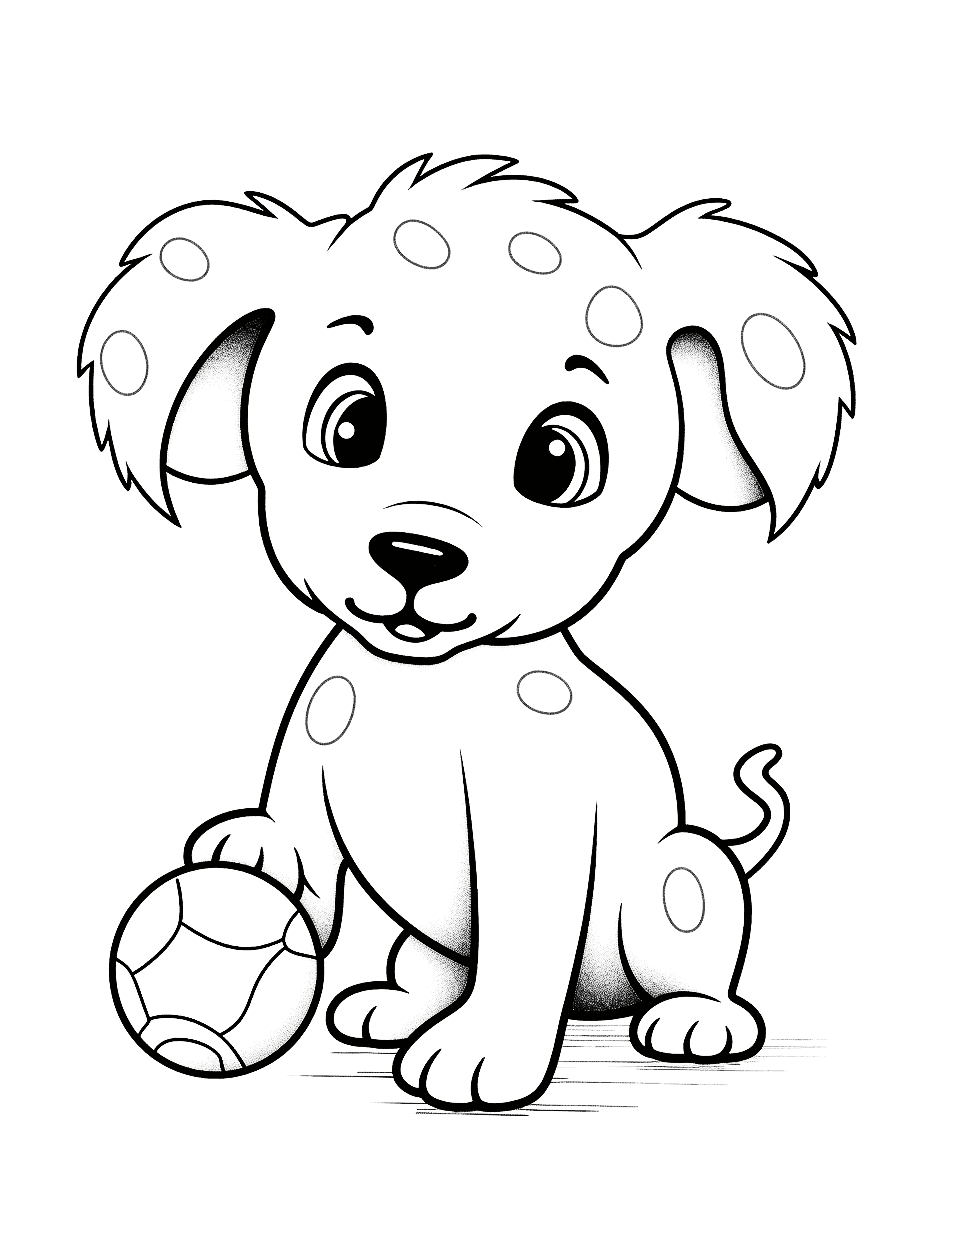 Cute Puppy Animal Coloring Page - A cute and adorable puppy playing with a ball.